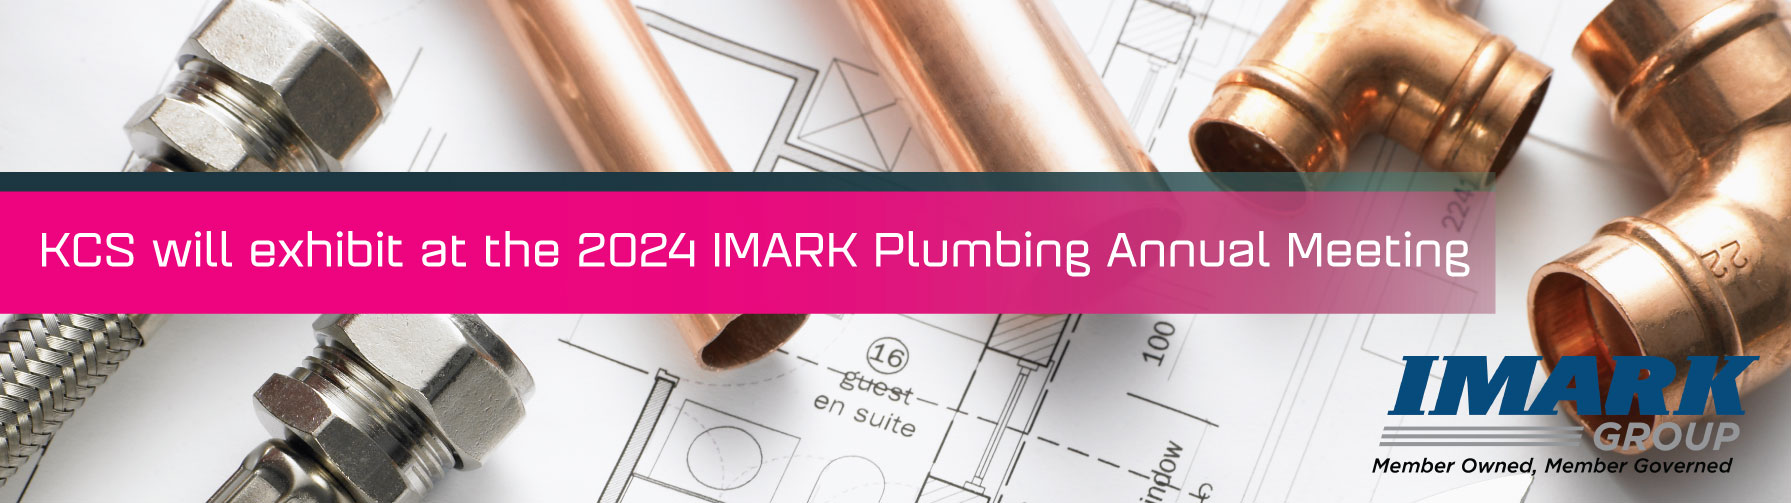 Pluming tools on a house plan with a copy strap that reads KCS will exhibit at the 2024 IMARK Plumbing Annual Meeting